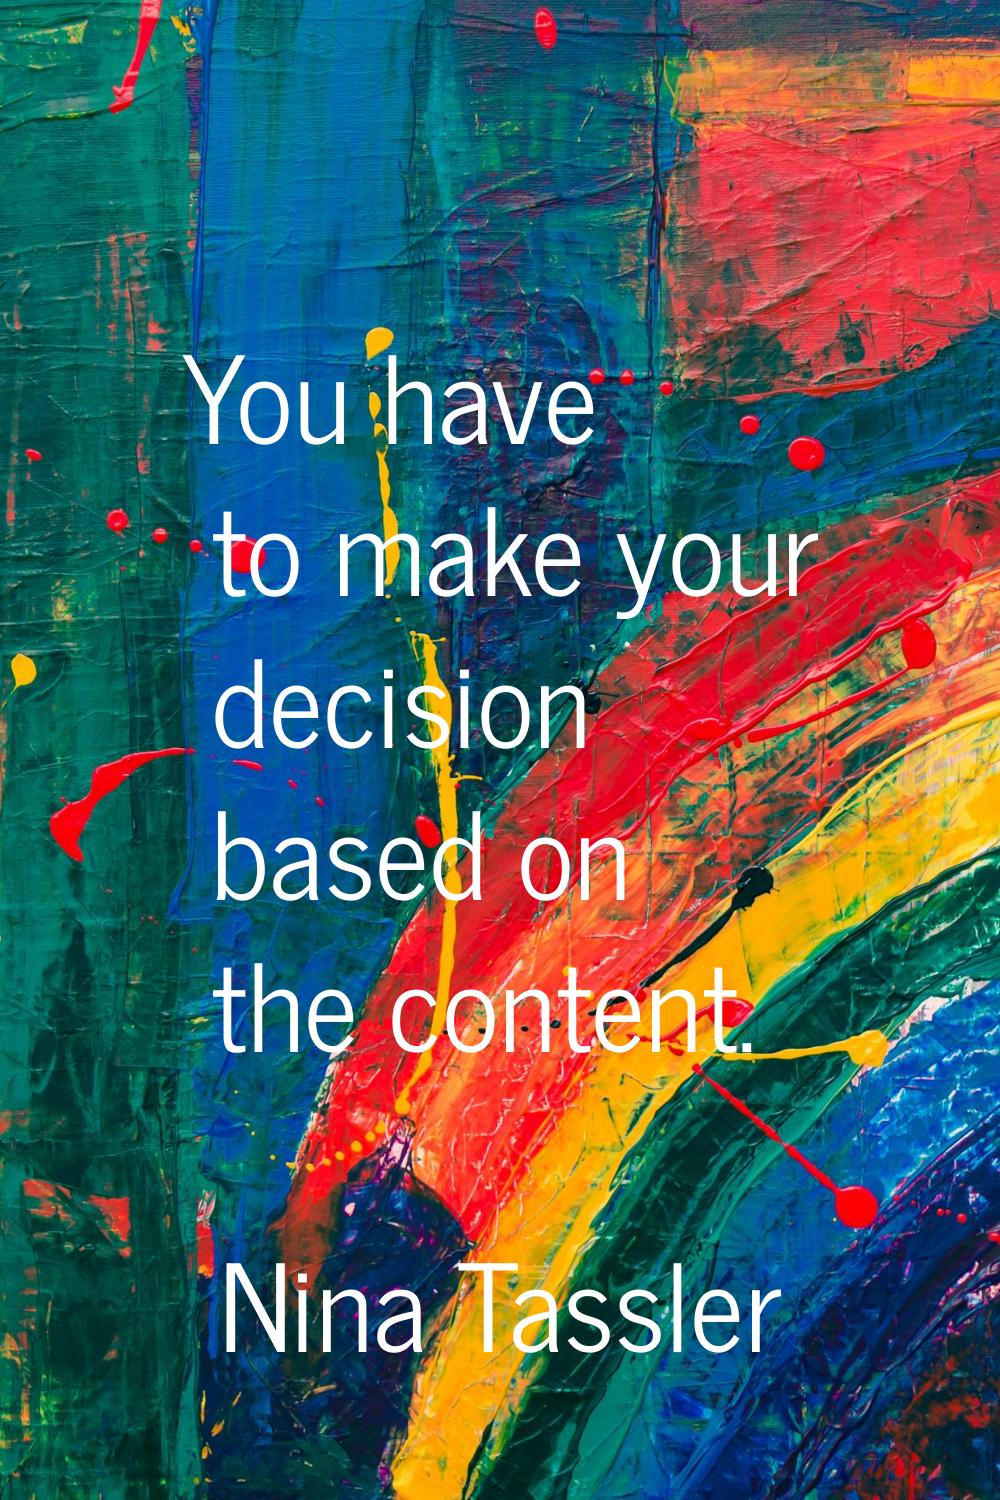 You have to make your decision based on the content.